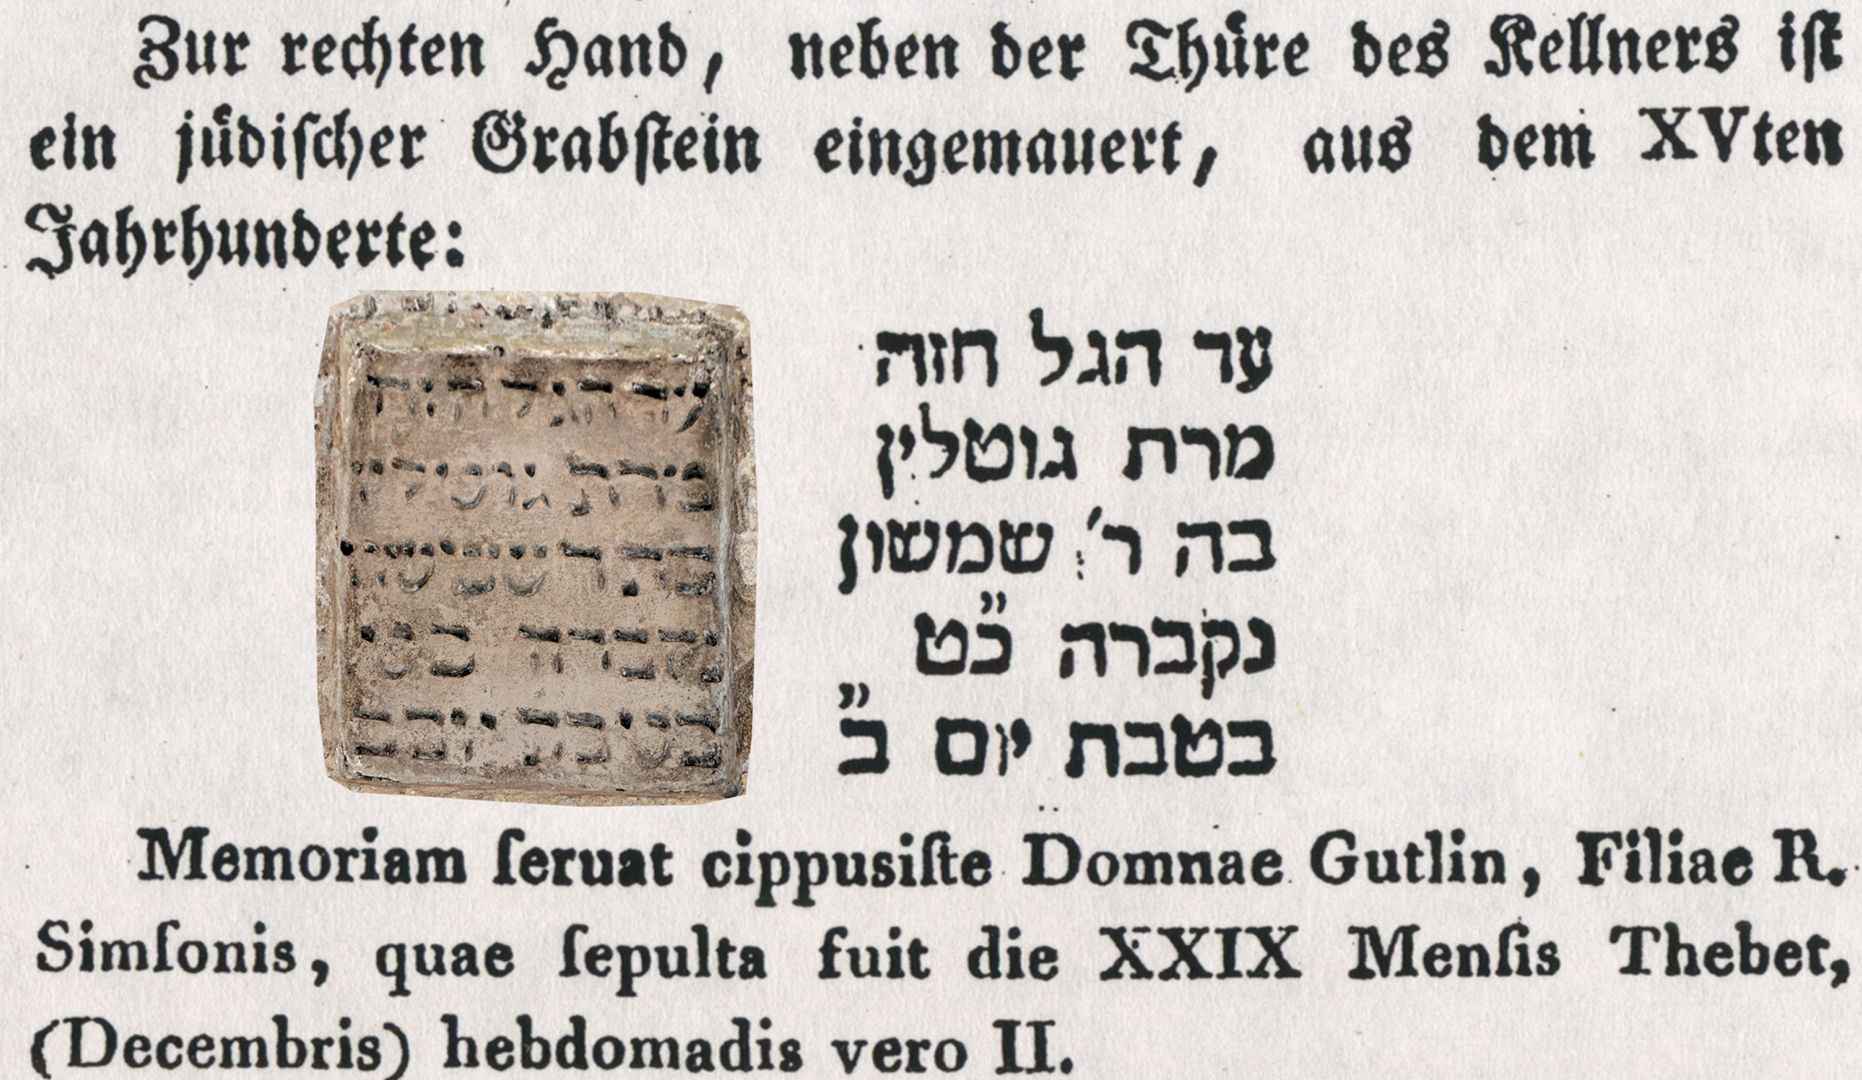 Jewish gravestone of Mrs Gutlin daughter of R` Simson Picture comparison: Tombstone and detail p. 73 from: Description of the most distinguished curiosities in the Imperial City of Nuremberg in its districts and at the University of Altdorf